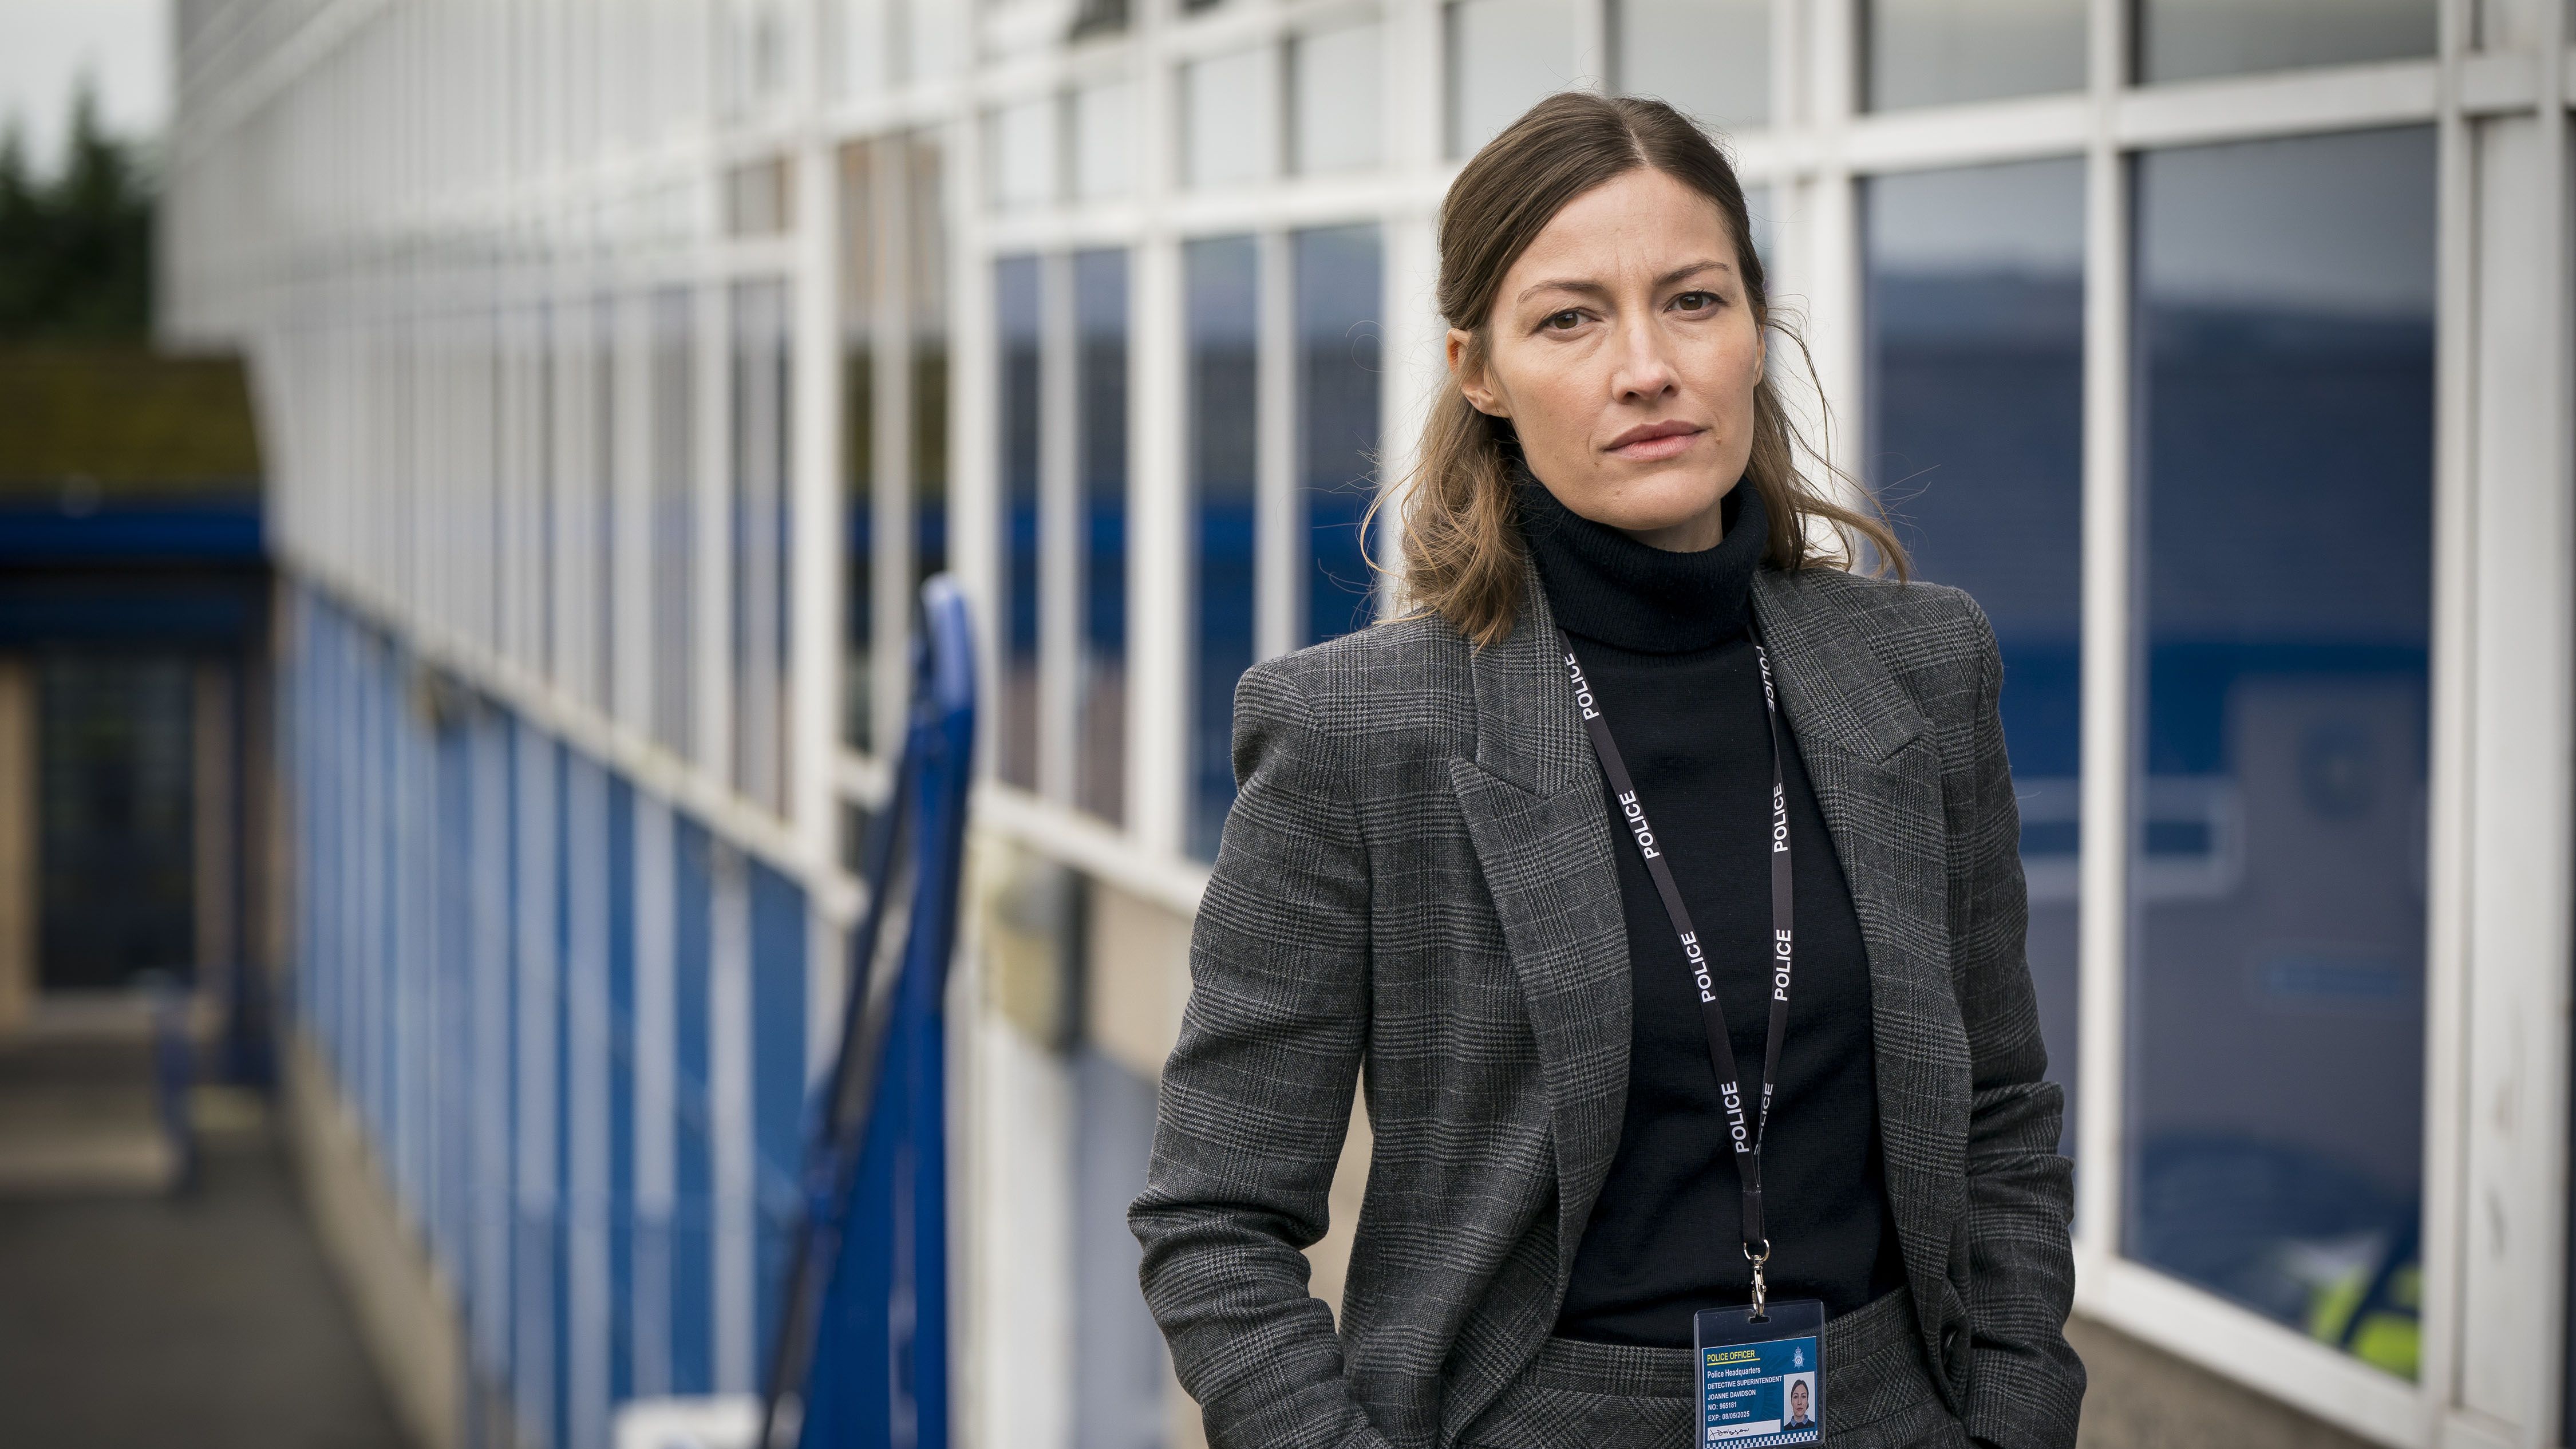 Kelly Macdonald Net Worth in 2023 How Rich is She Now? - News